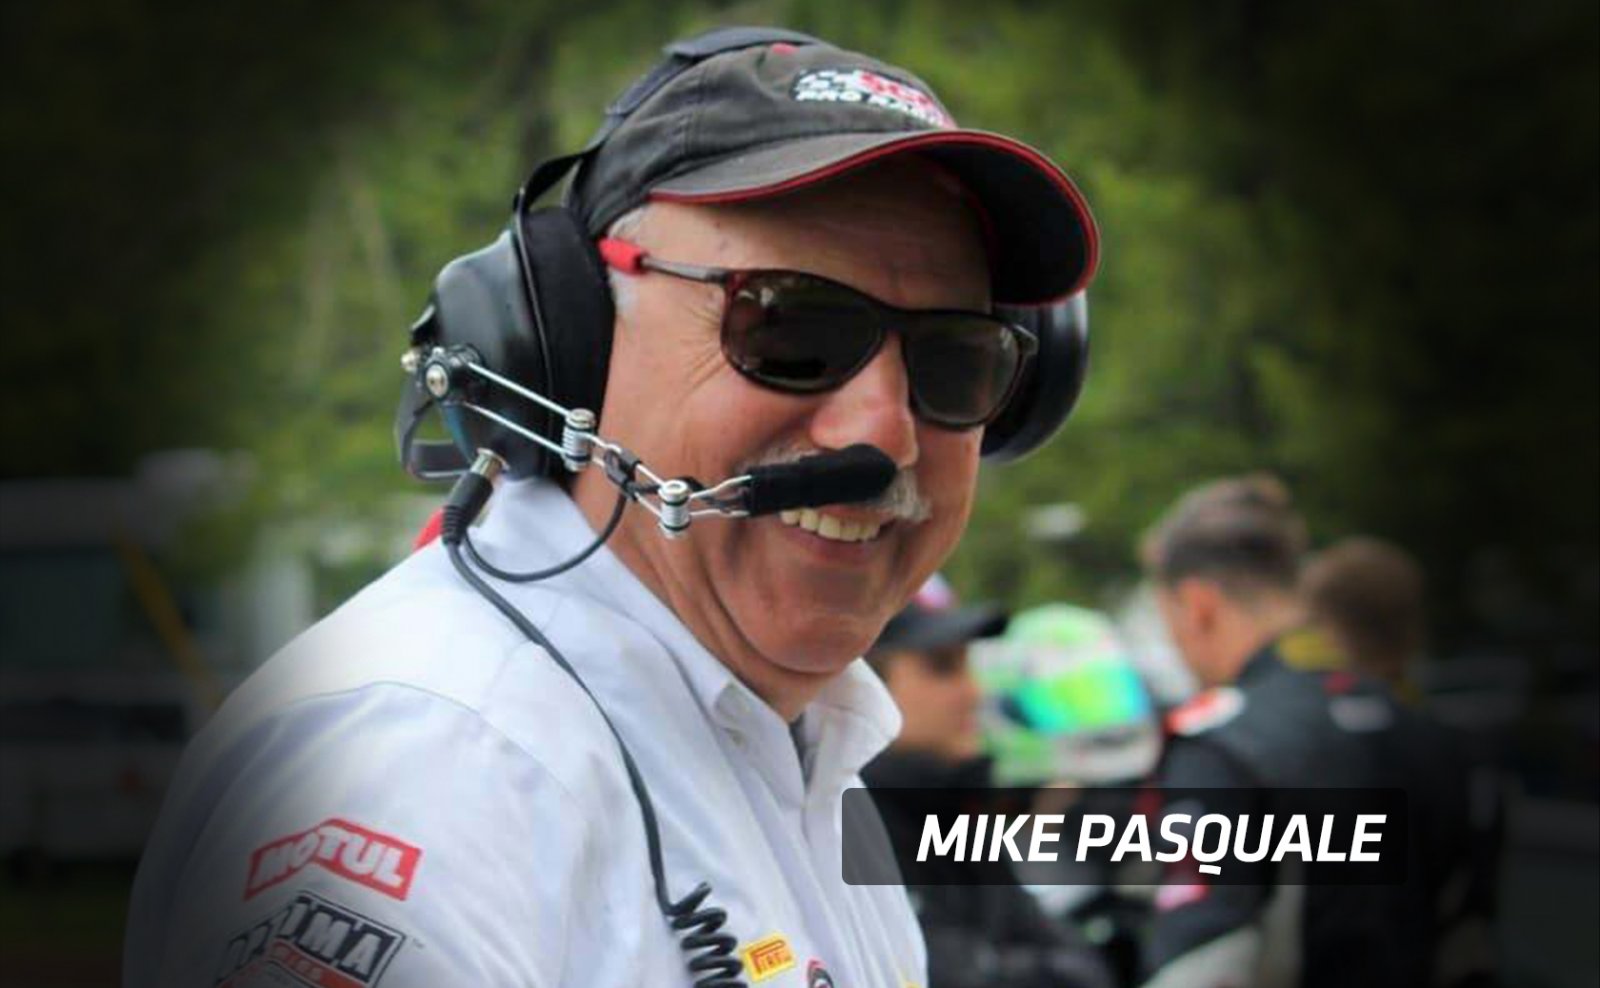 SRO America Senior Technical Official Mike Pasquale Mourned in Passing